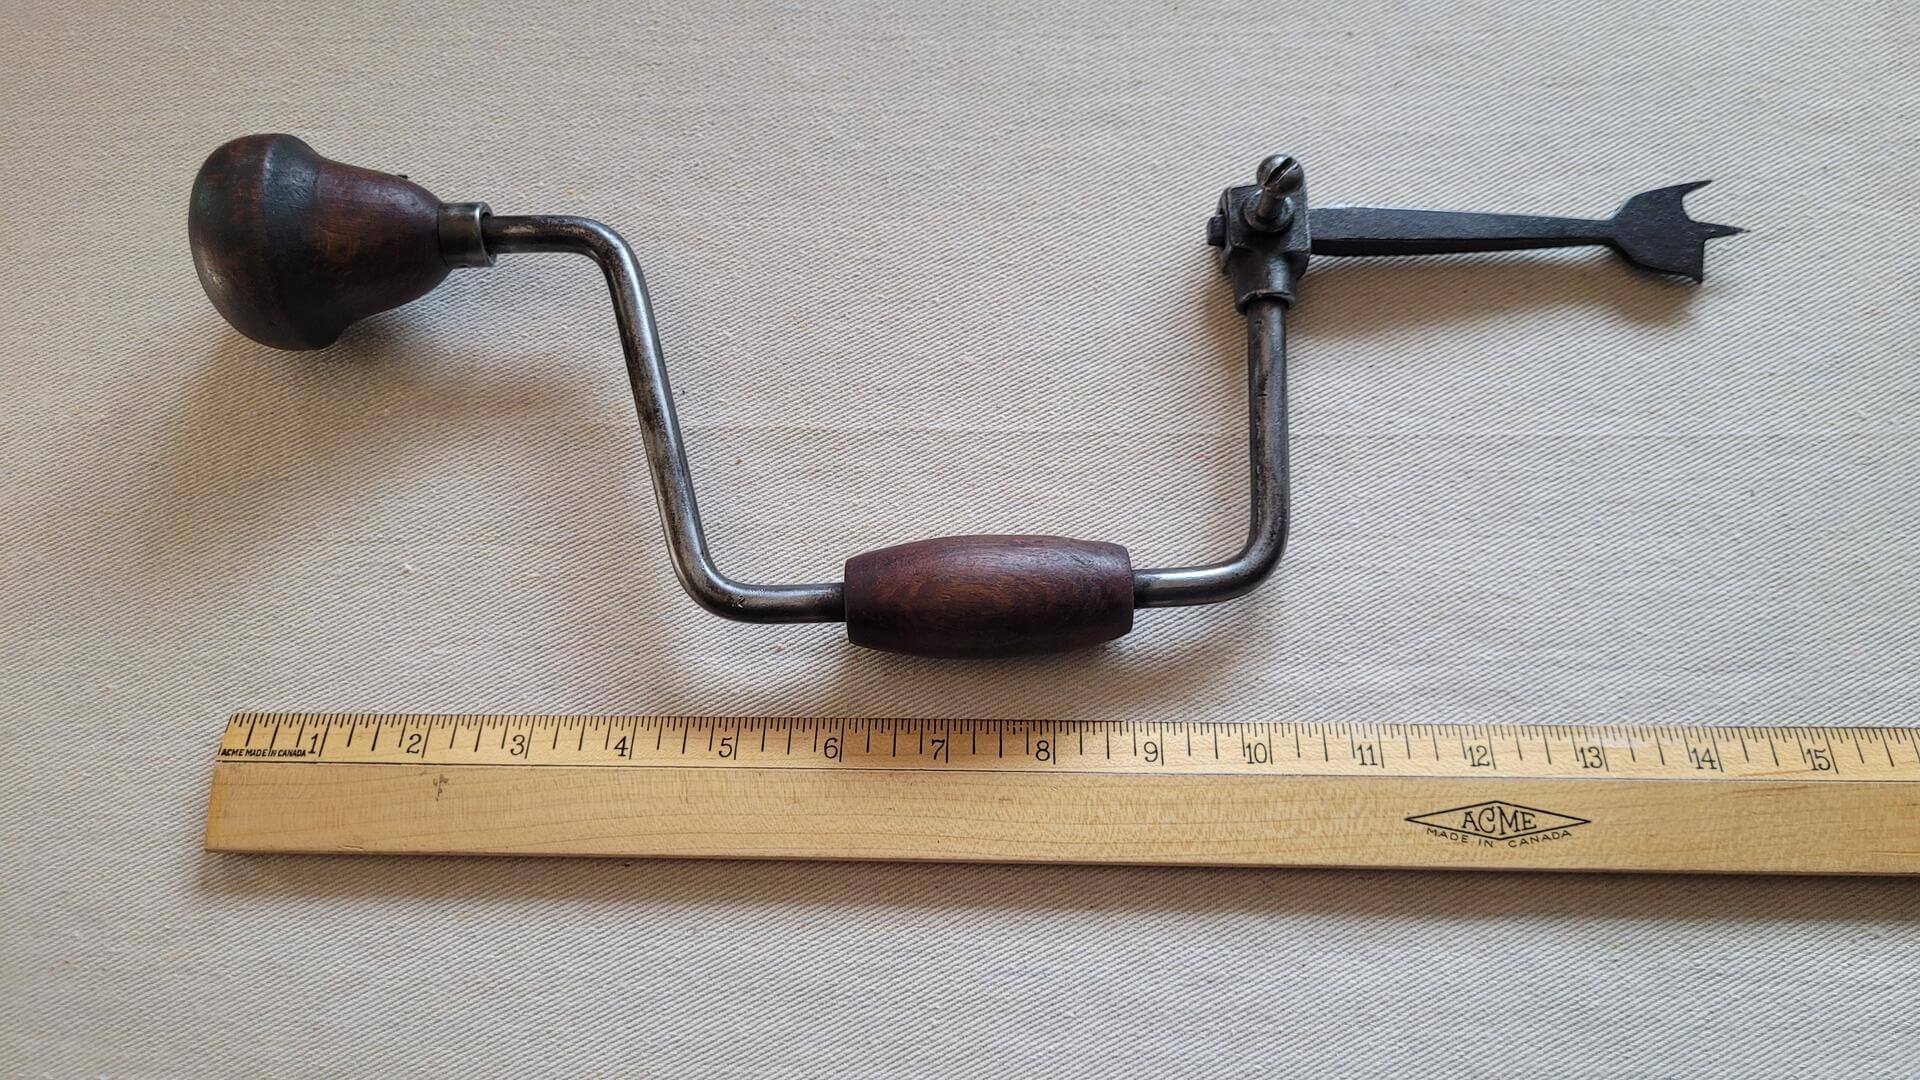 Antique woodworking bit brace hand drill with the original auger bit and hardwood handles. Vintage made in Germany collectible primitive carpentry and cabinet maker tool